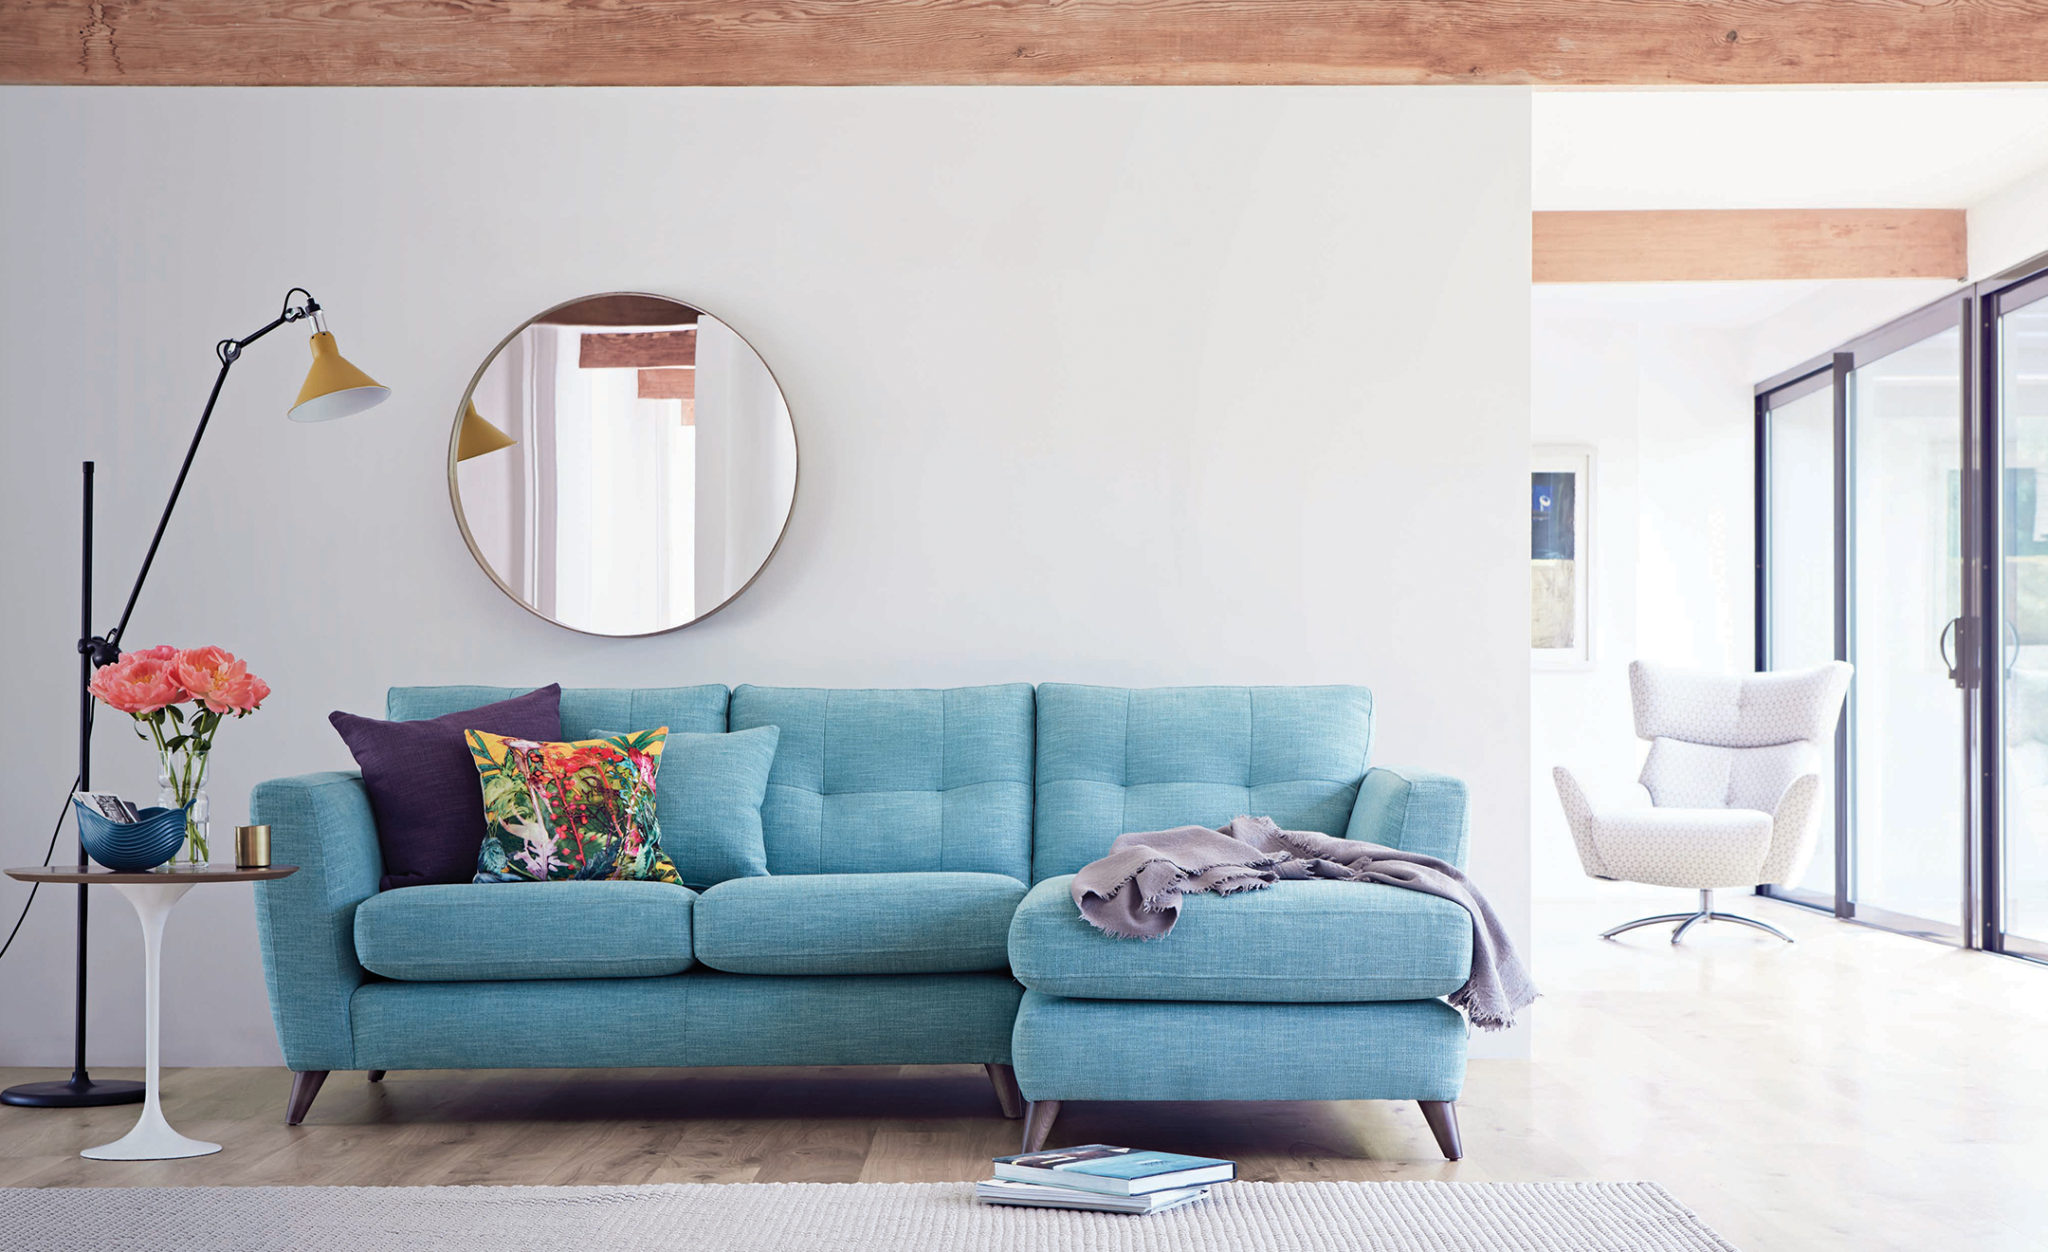 How To Choose A Sofa For Your Style: The Lounge Co.